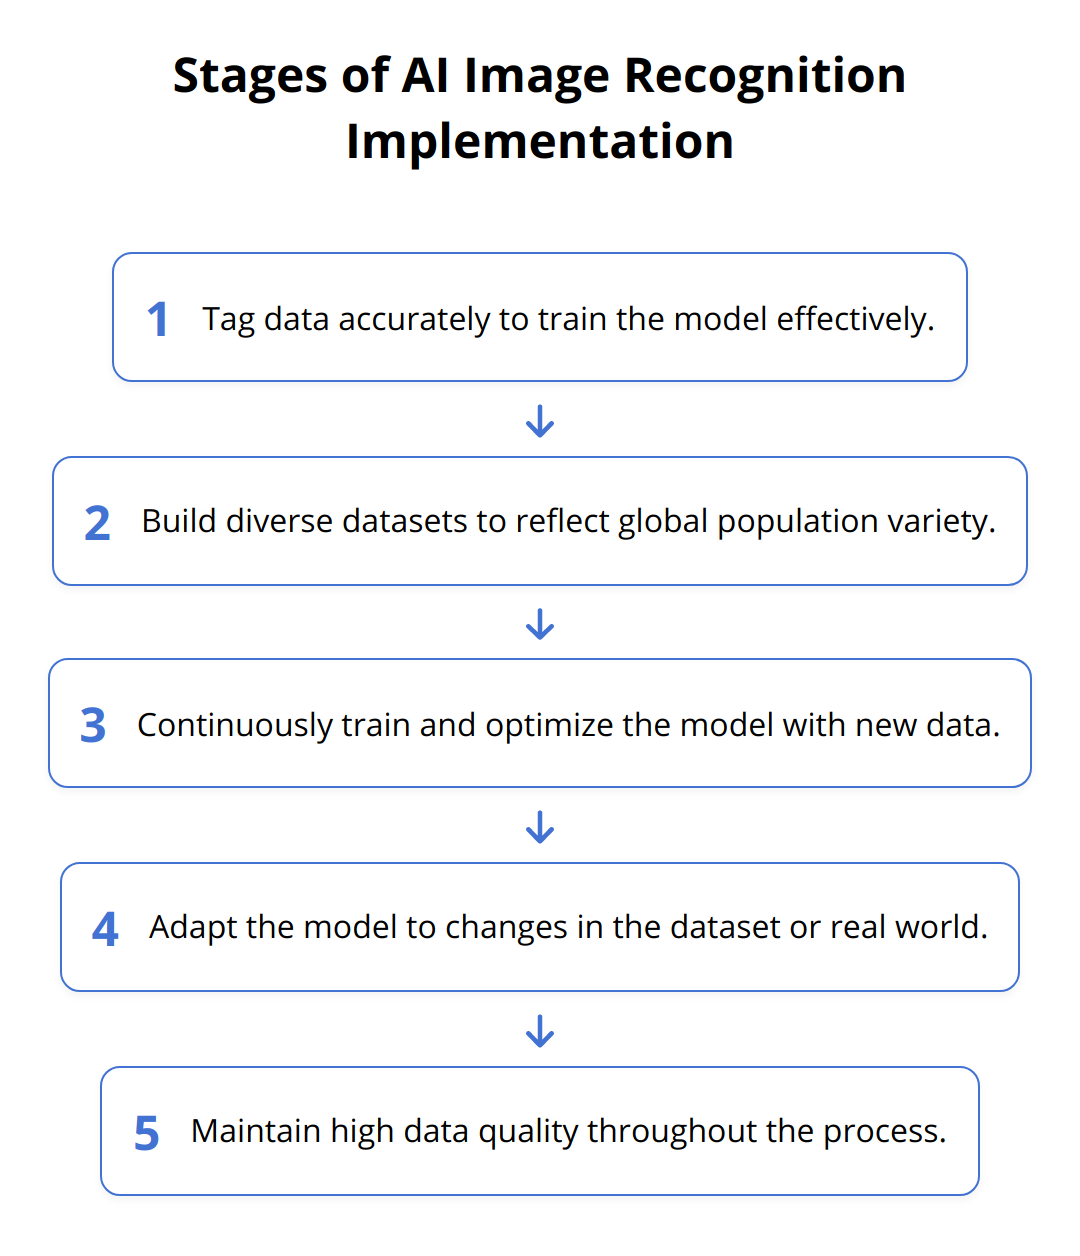 Flow Chart - Stages of AI Image Recognition Implementation